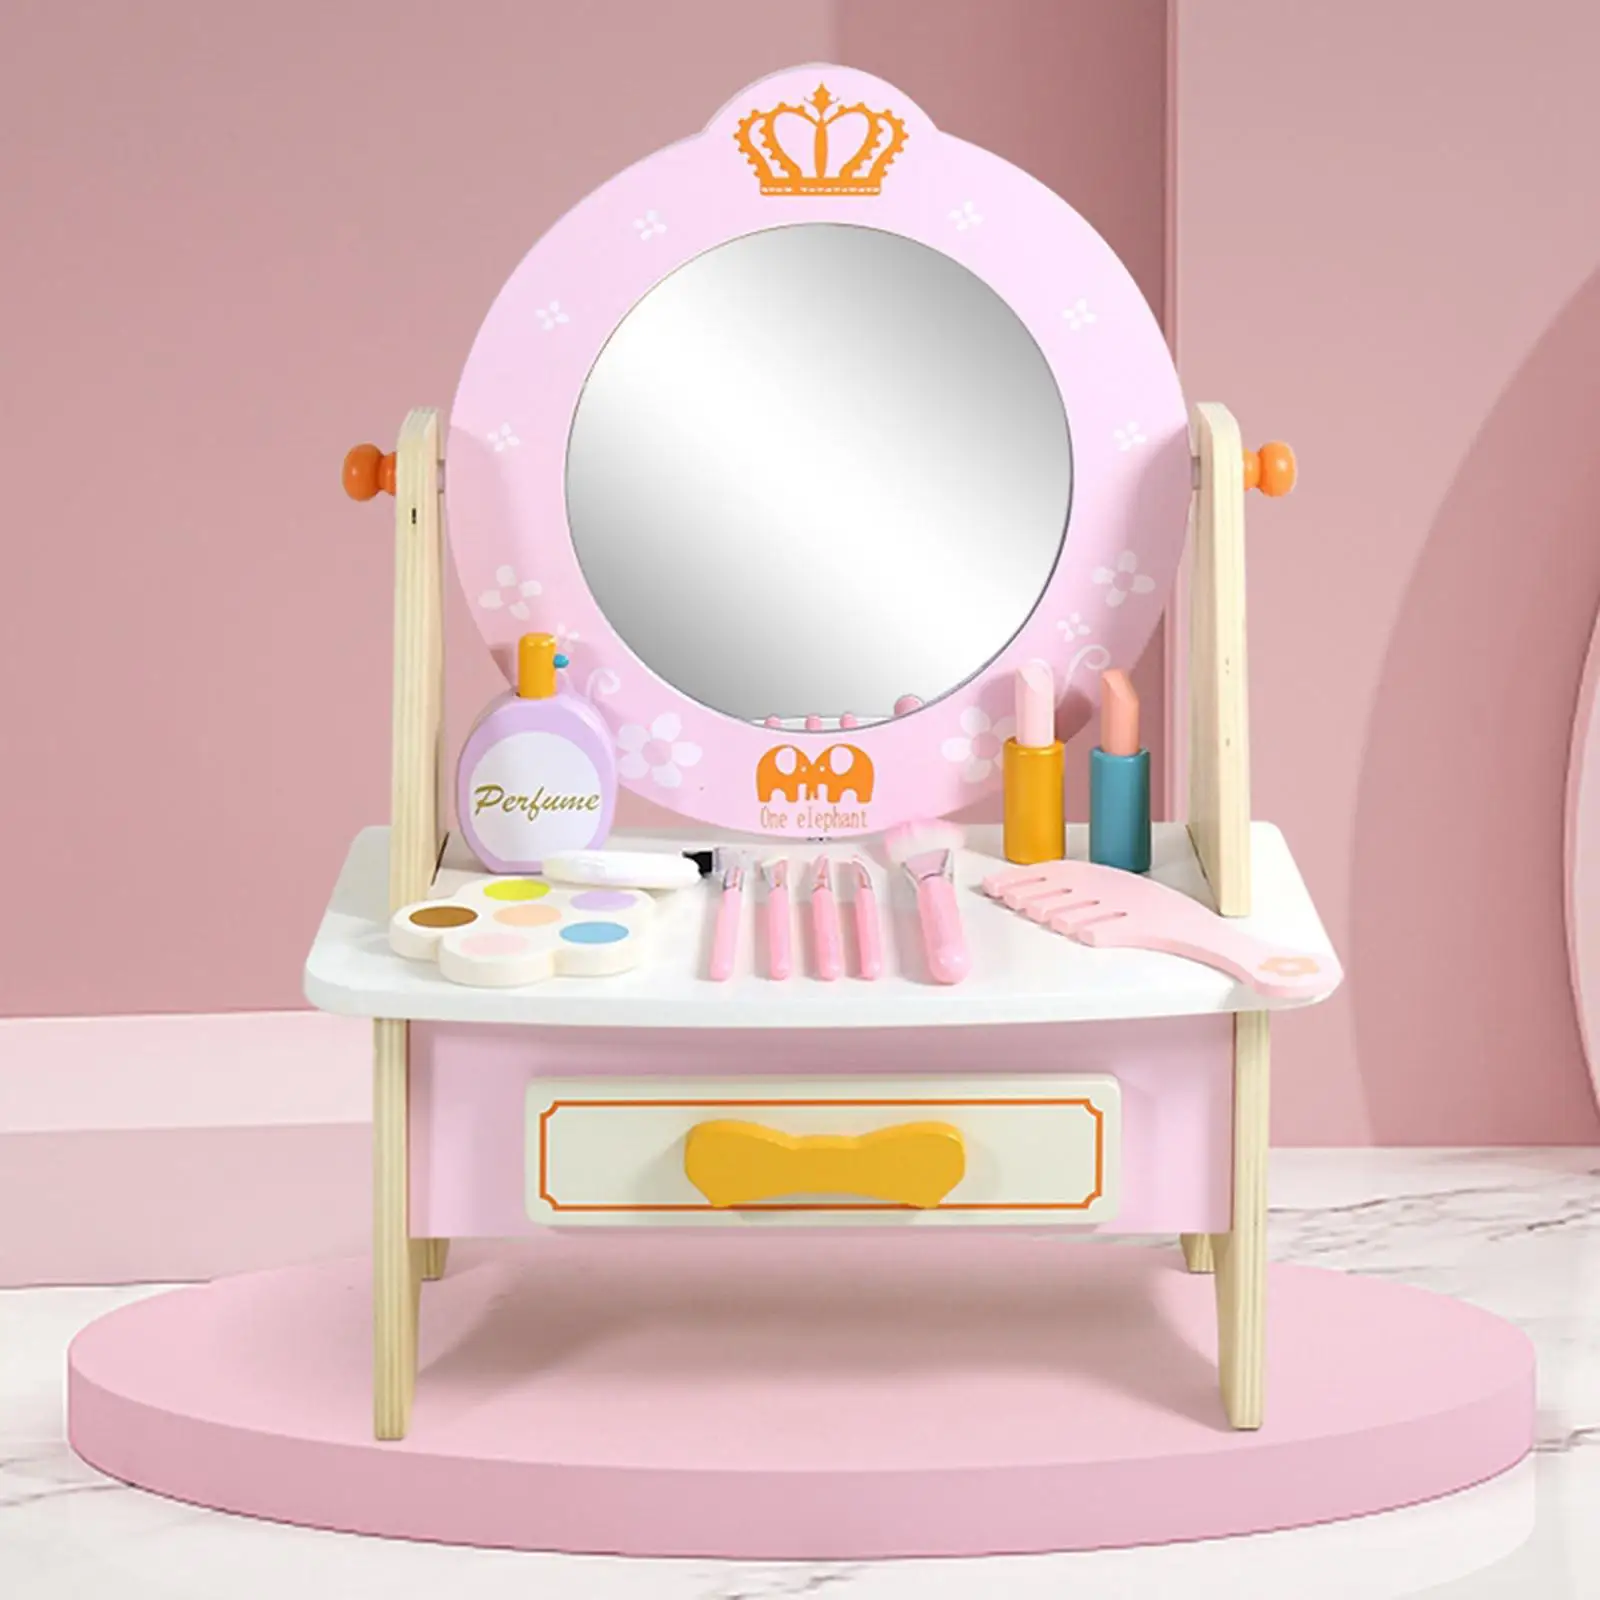 Simulation Makeup Table Toys Beauty Playset Role Play Princess Vanity Table with Makeup Accessories for Toddler Birthday Gifts